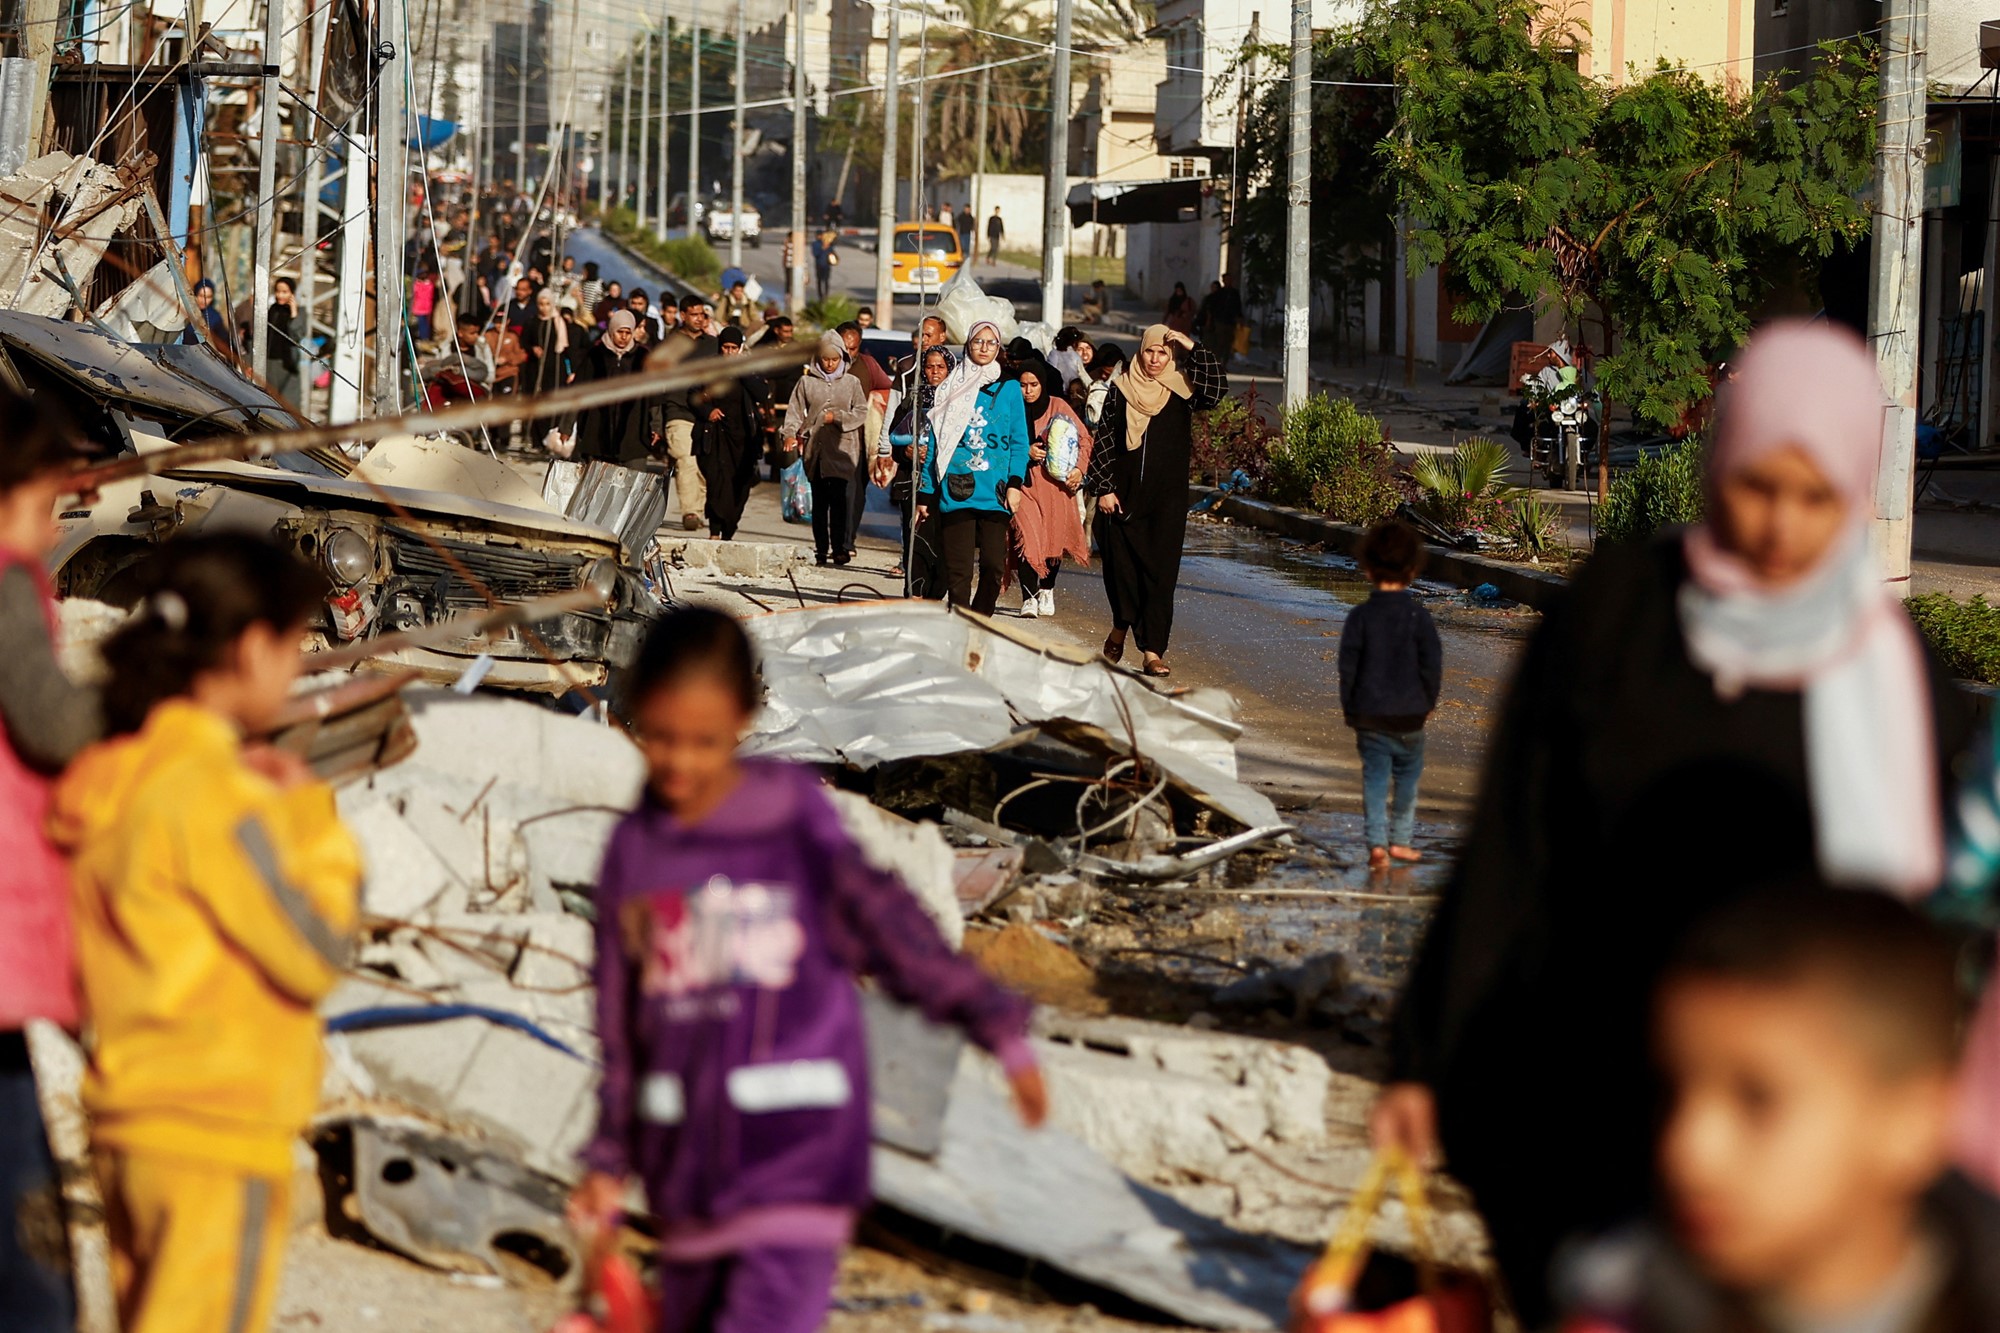 Palestinians are pictured walking through a street with a lot of damage.